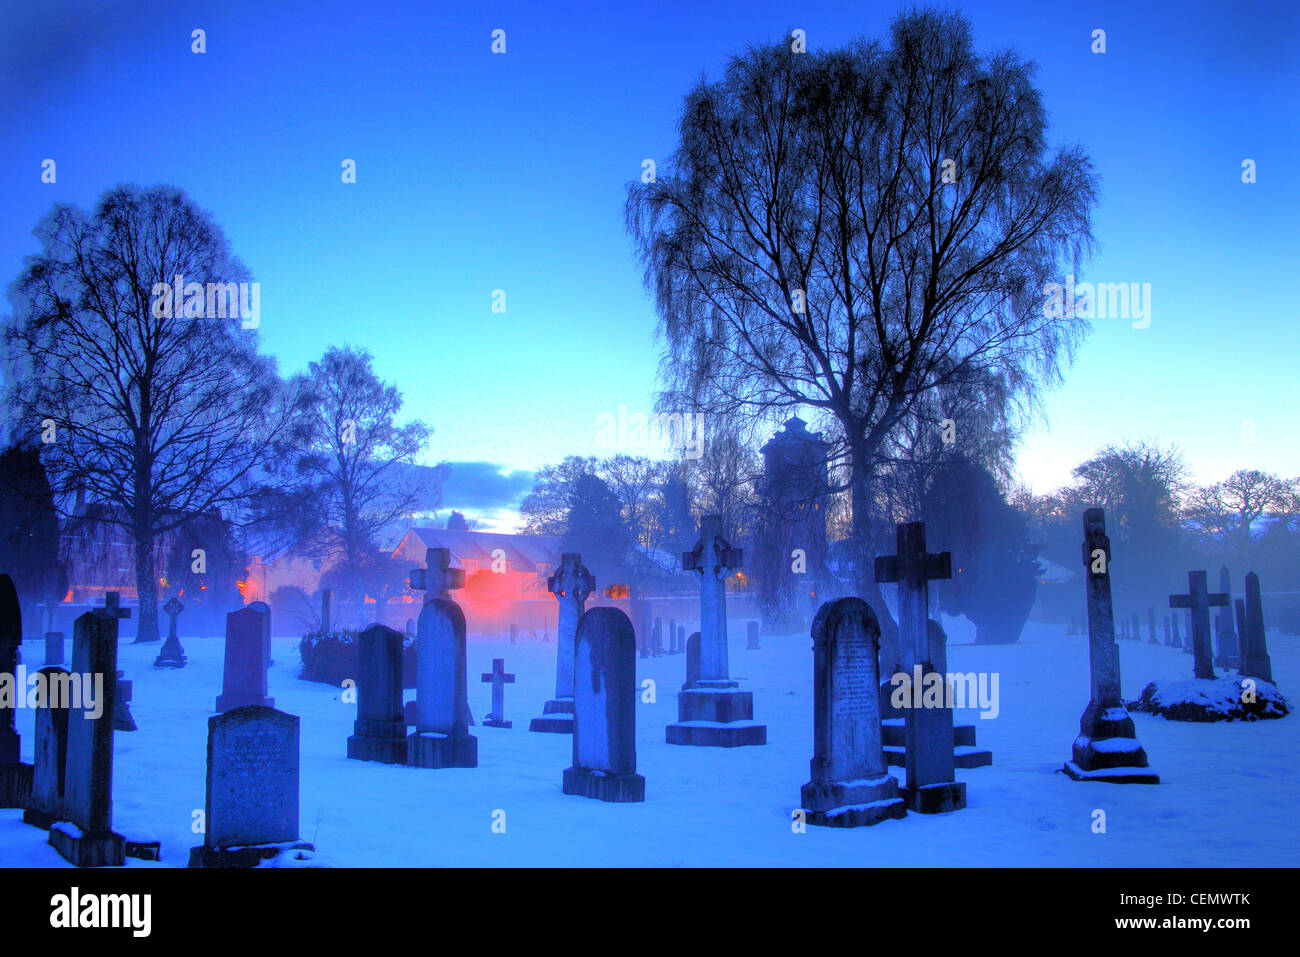 Dalkeith Cemetery Dusk, Midlothian, Edinburgh, Scotland, UK  A blue, ice, icy, cold winters night with low temperatures. Stock Photo